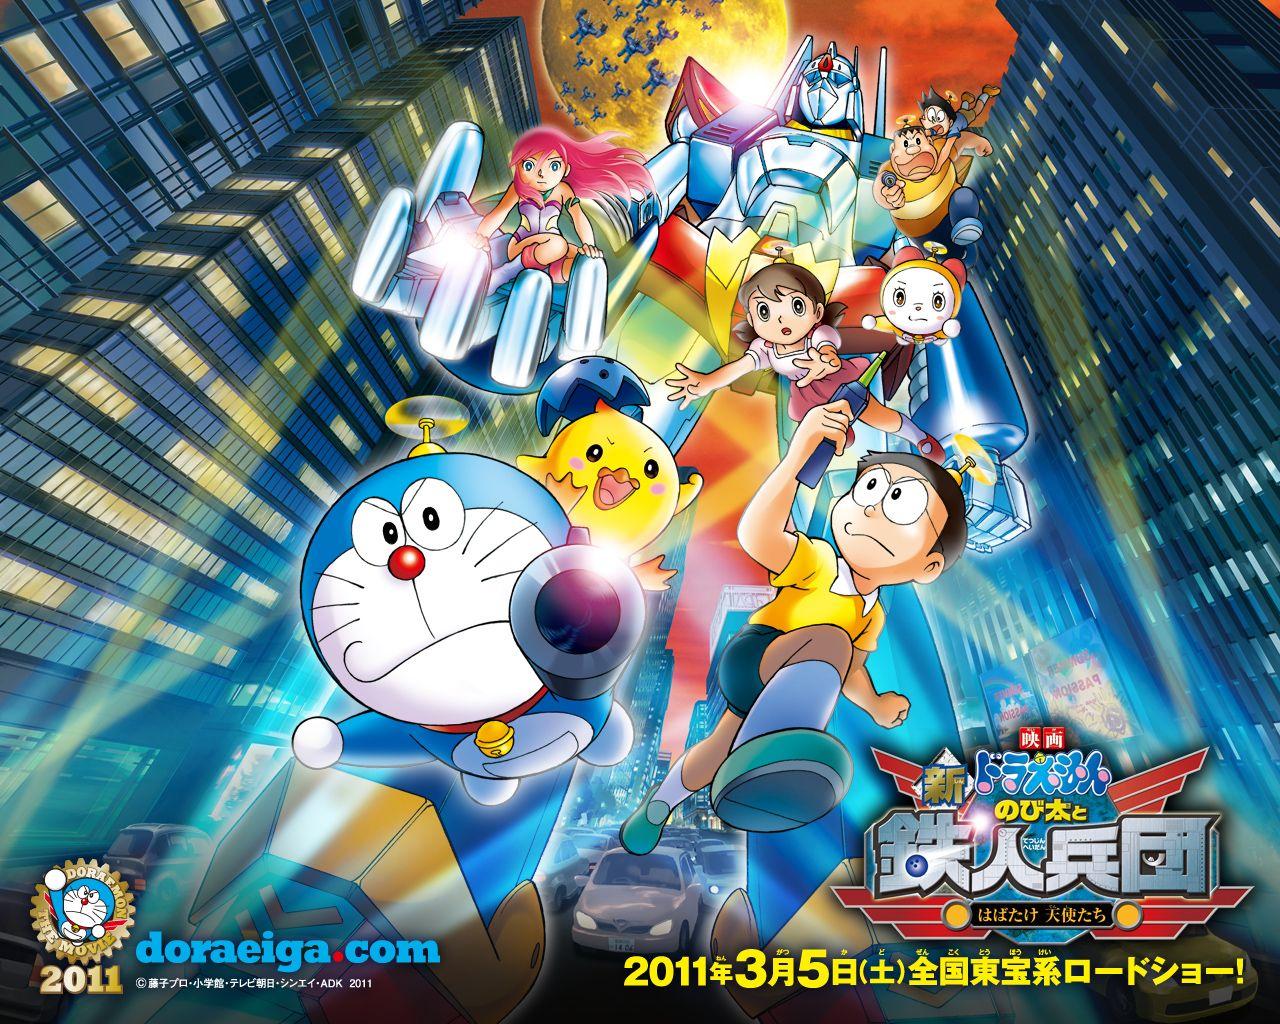 Doraemon: Nobita and the New Steel Troops: Winged Angels 2011